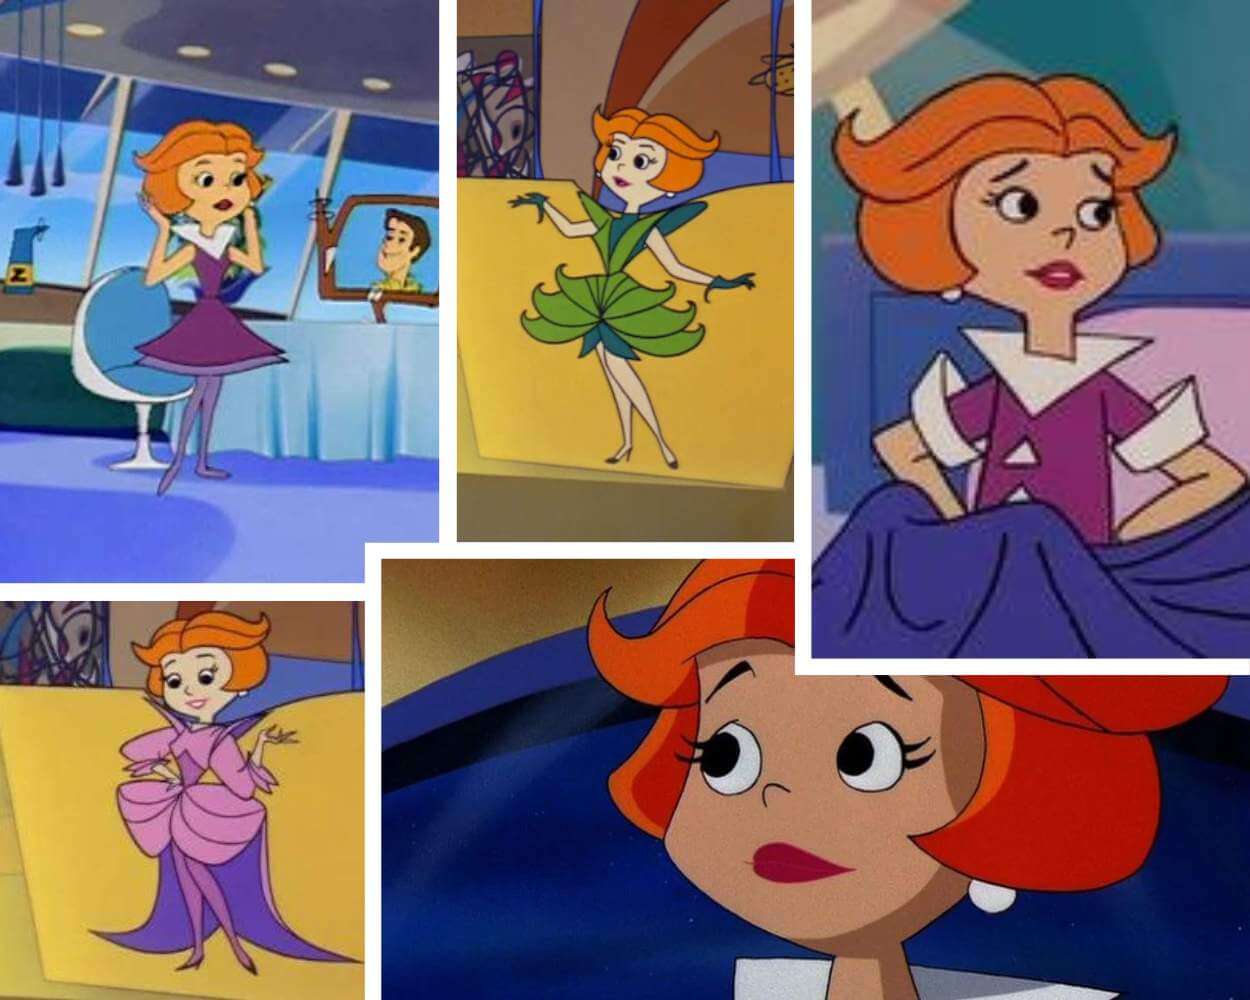 Jane Jetson Is another main character from The Jetsons